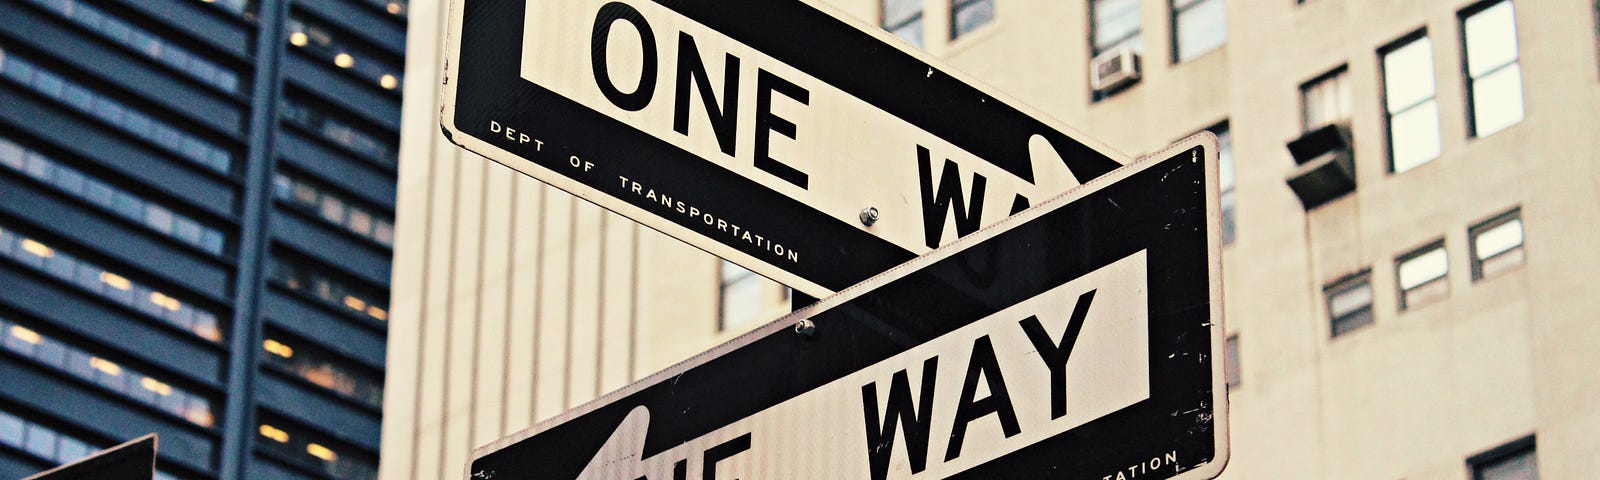 Street signs read “One Way” facing opposite directions